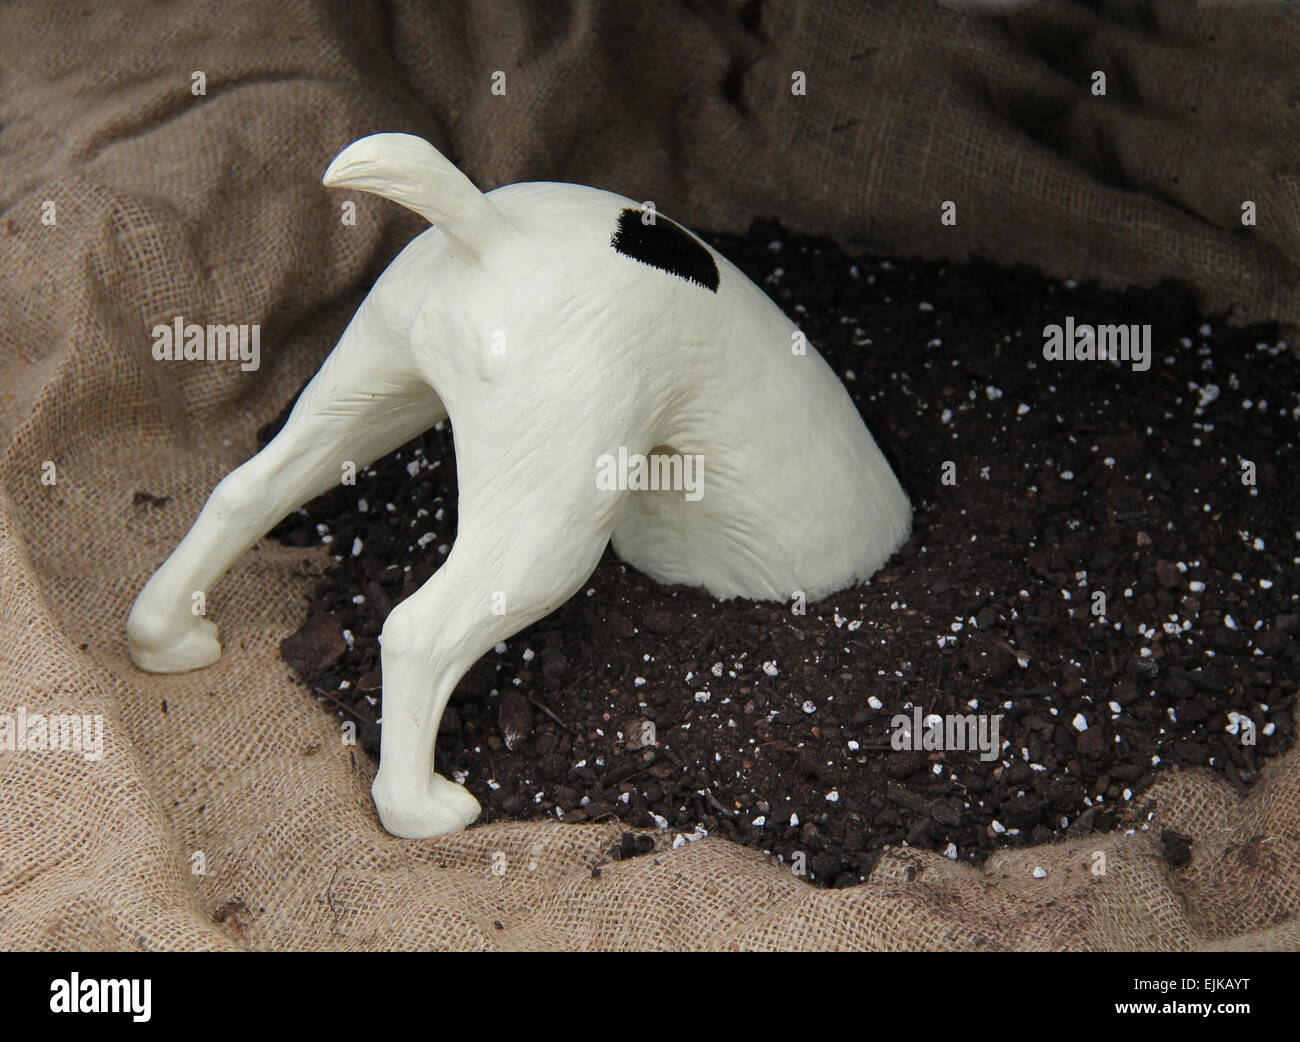 A Model of a Dogs Head Digging in a Pile of Soil. Stock Photo